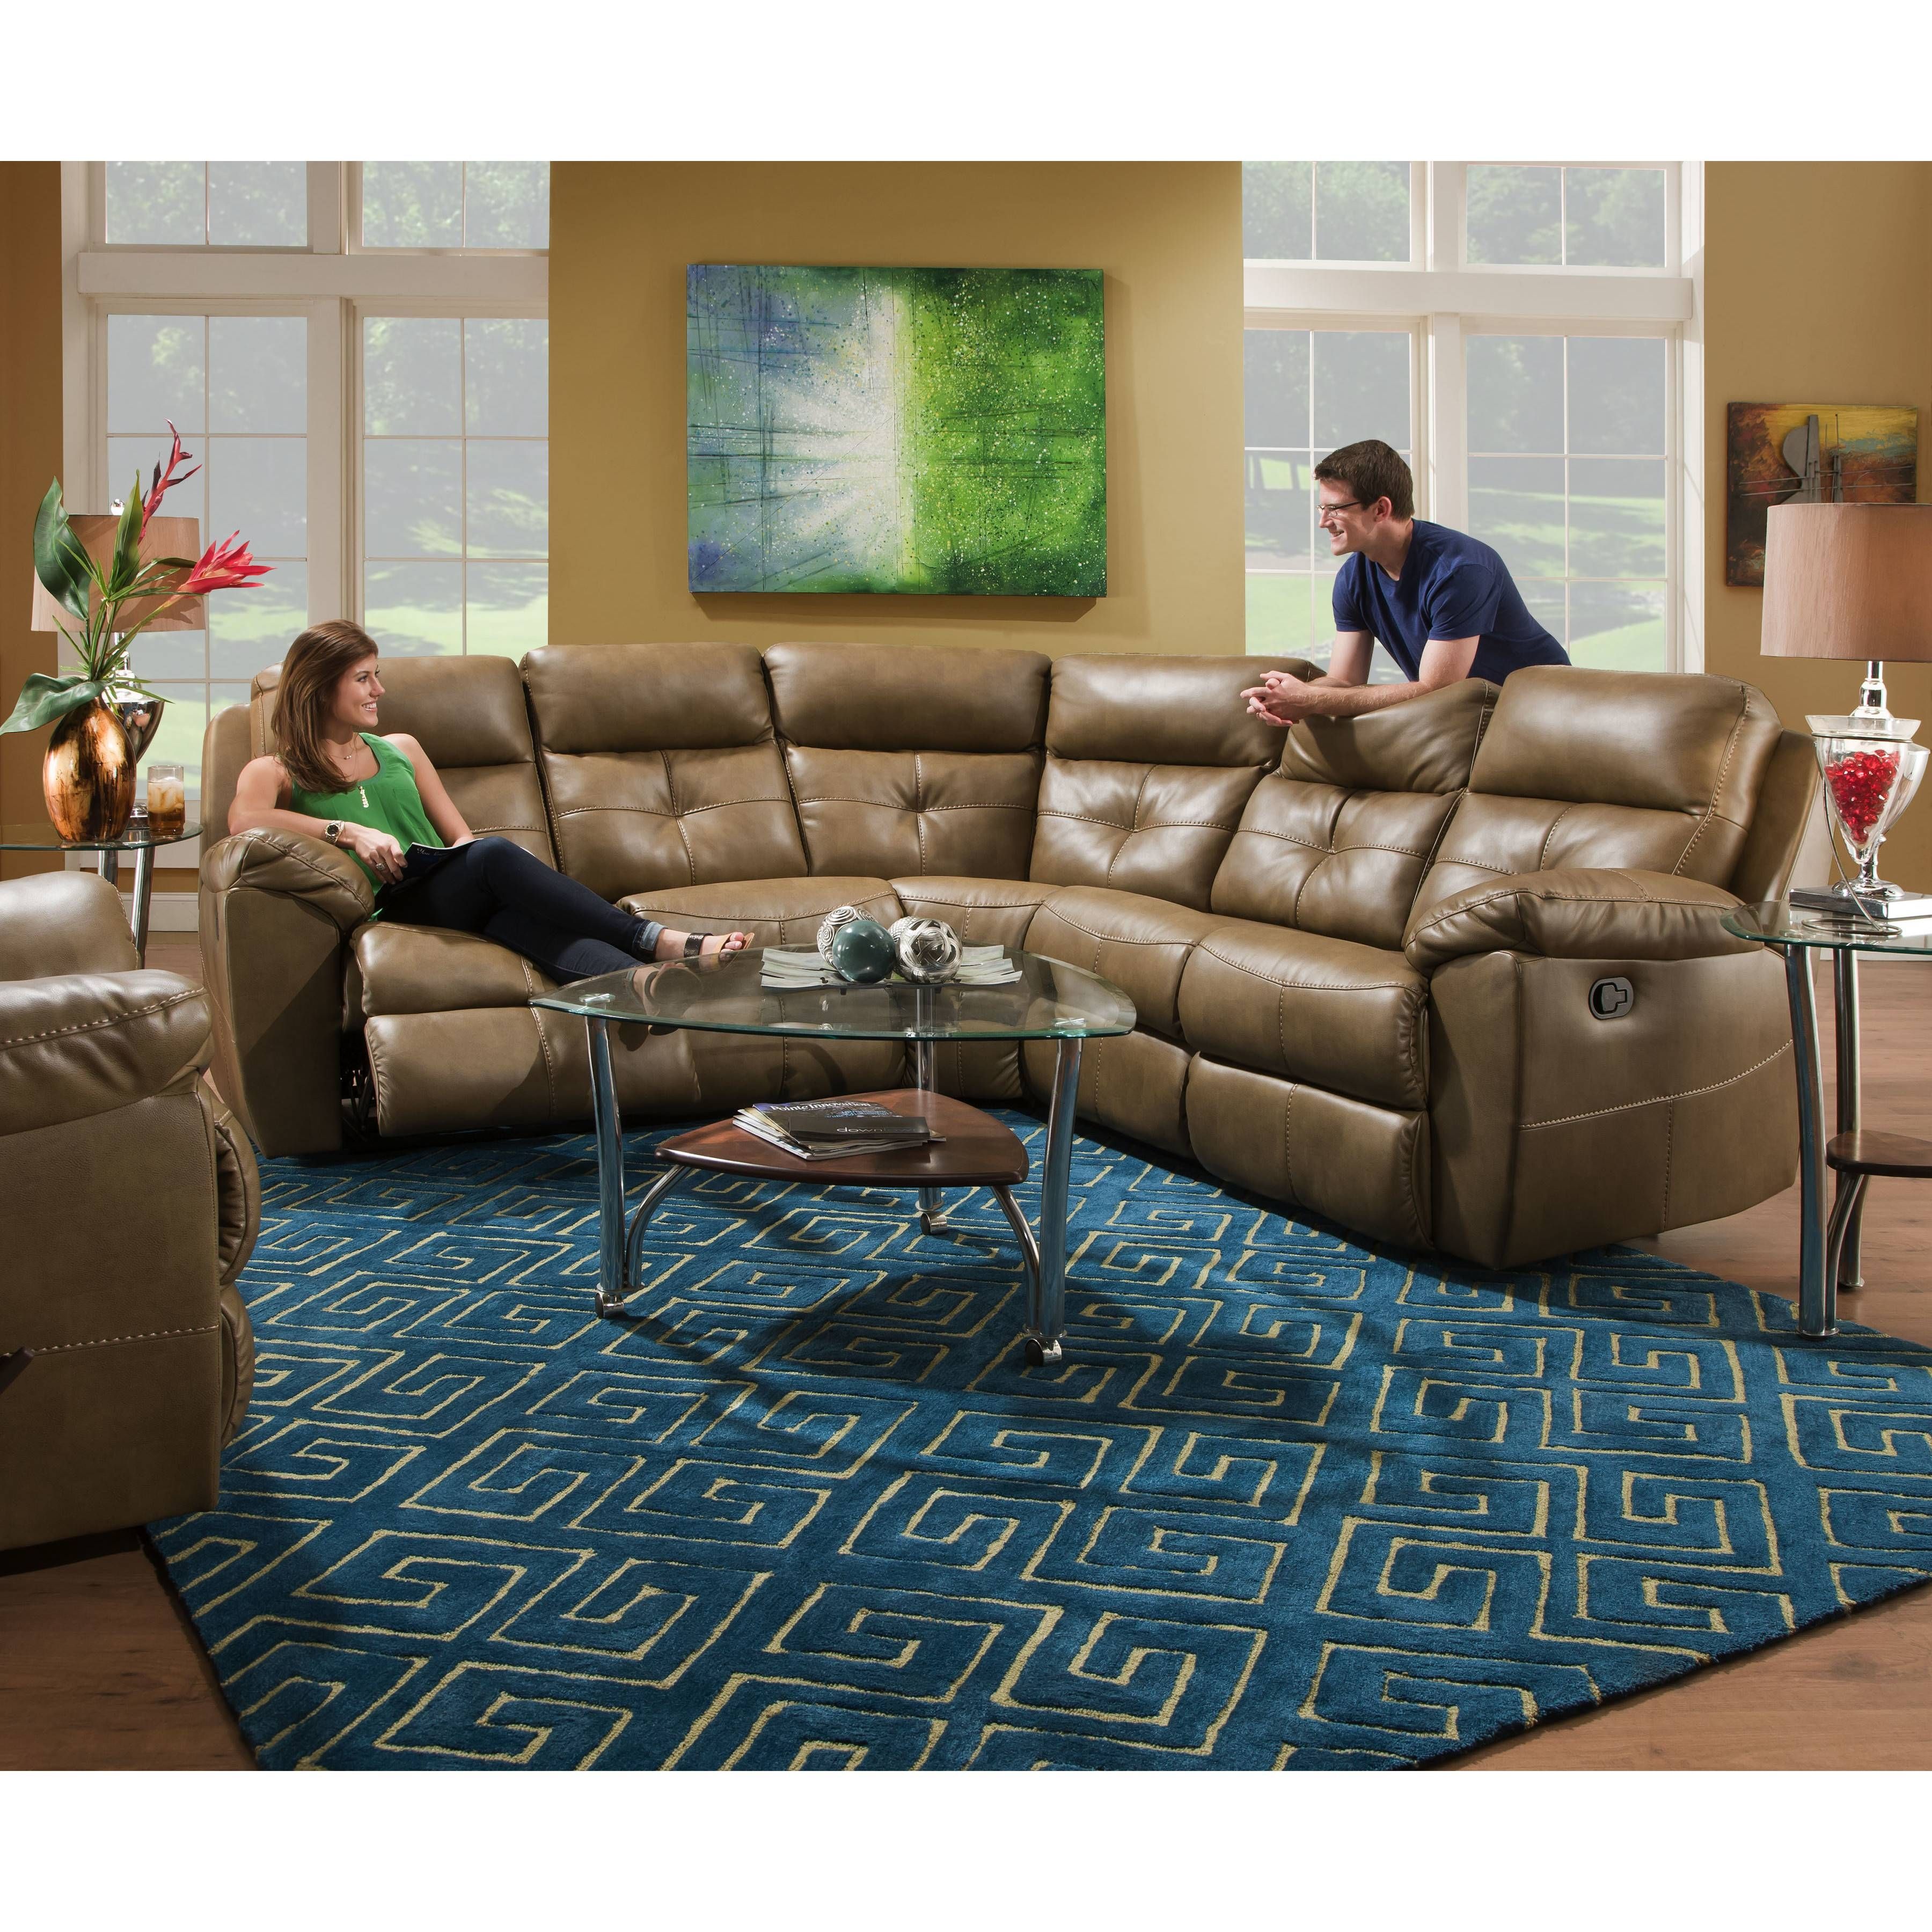 Furniture: Sectional Sofas Big Lots | Simmons Bonded Leather Sofa Regarding Simmons Bonded Leather Sofas (View 9 of 15)